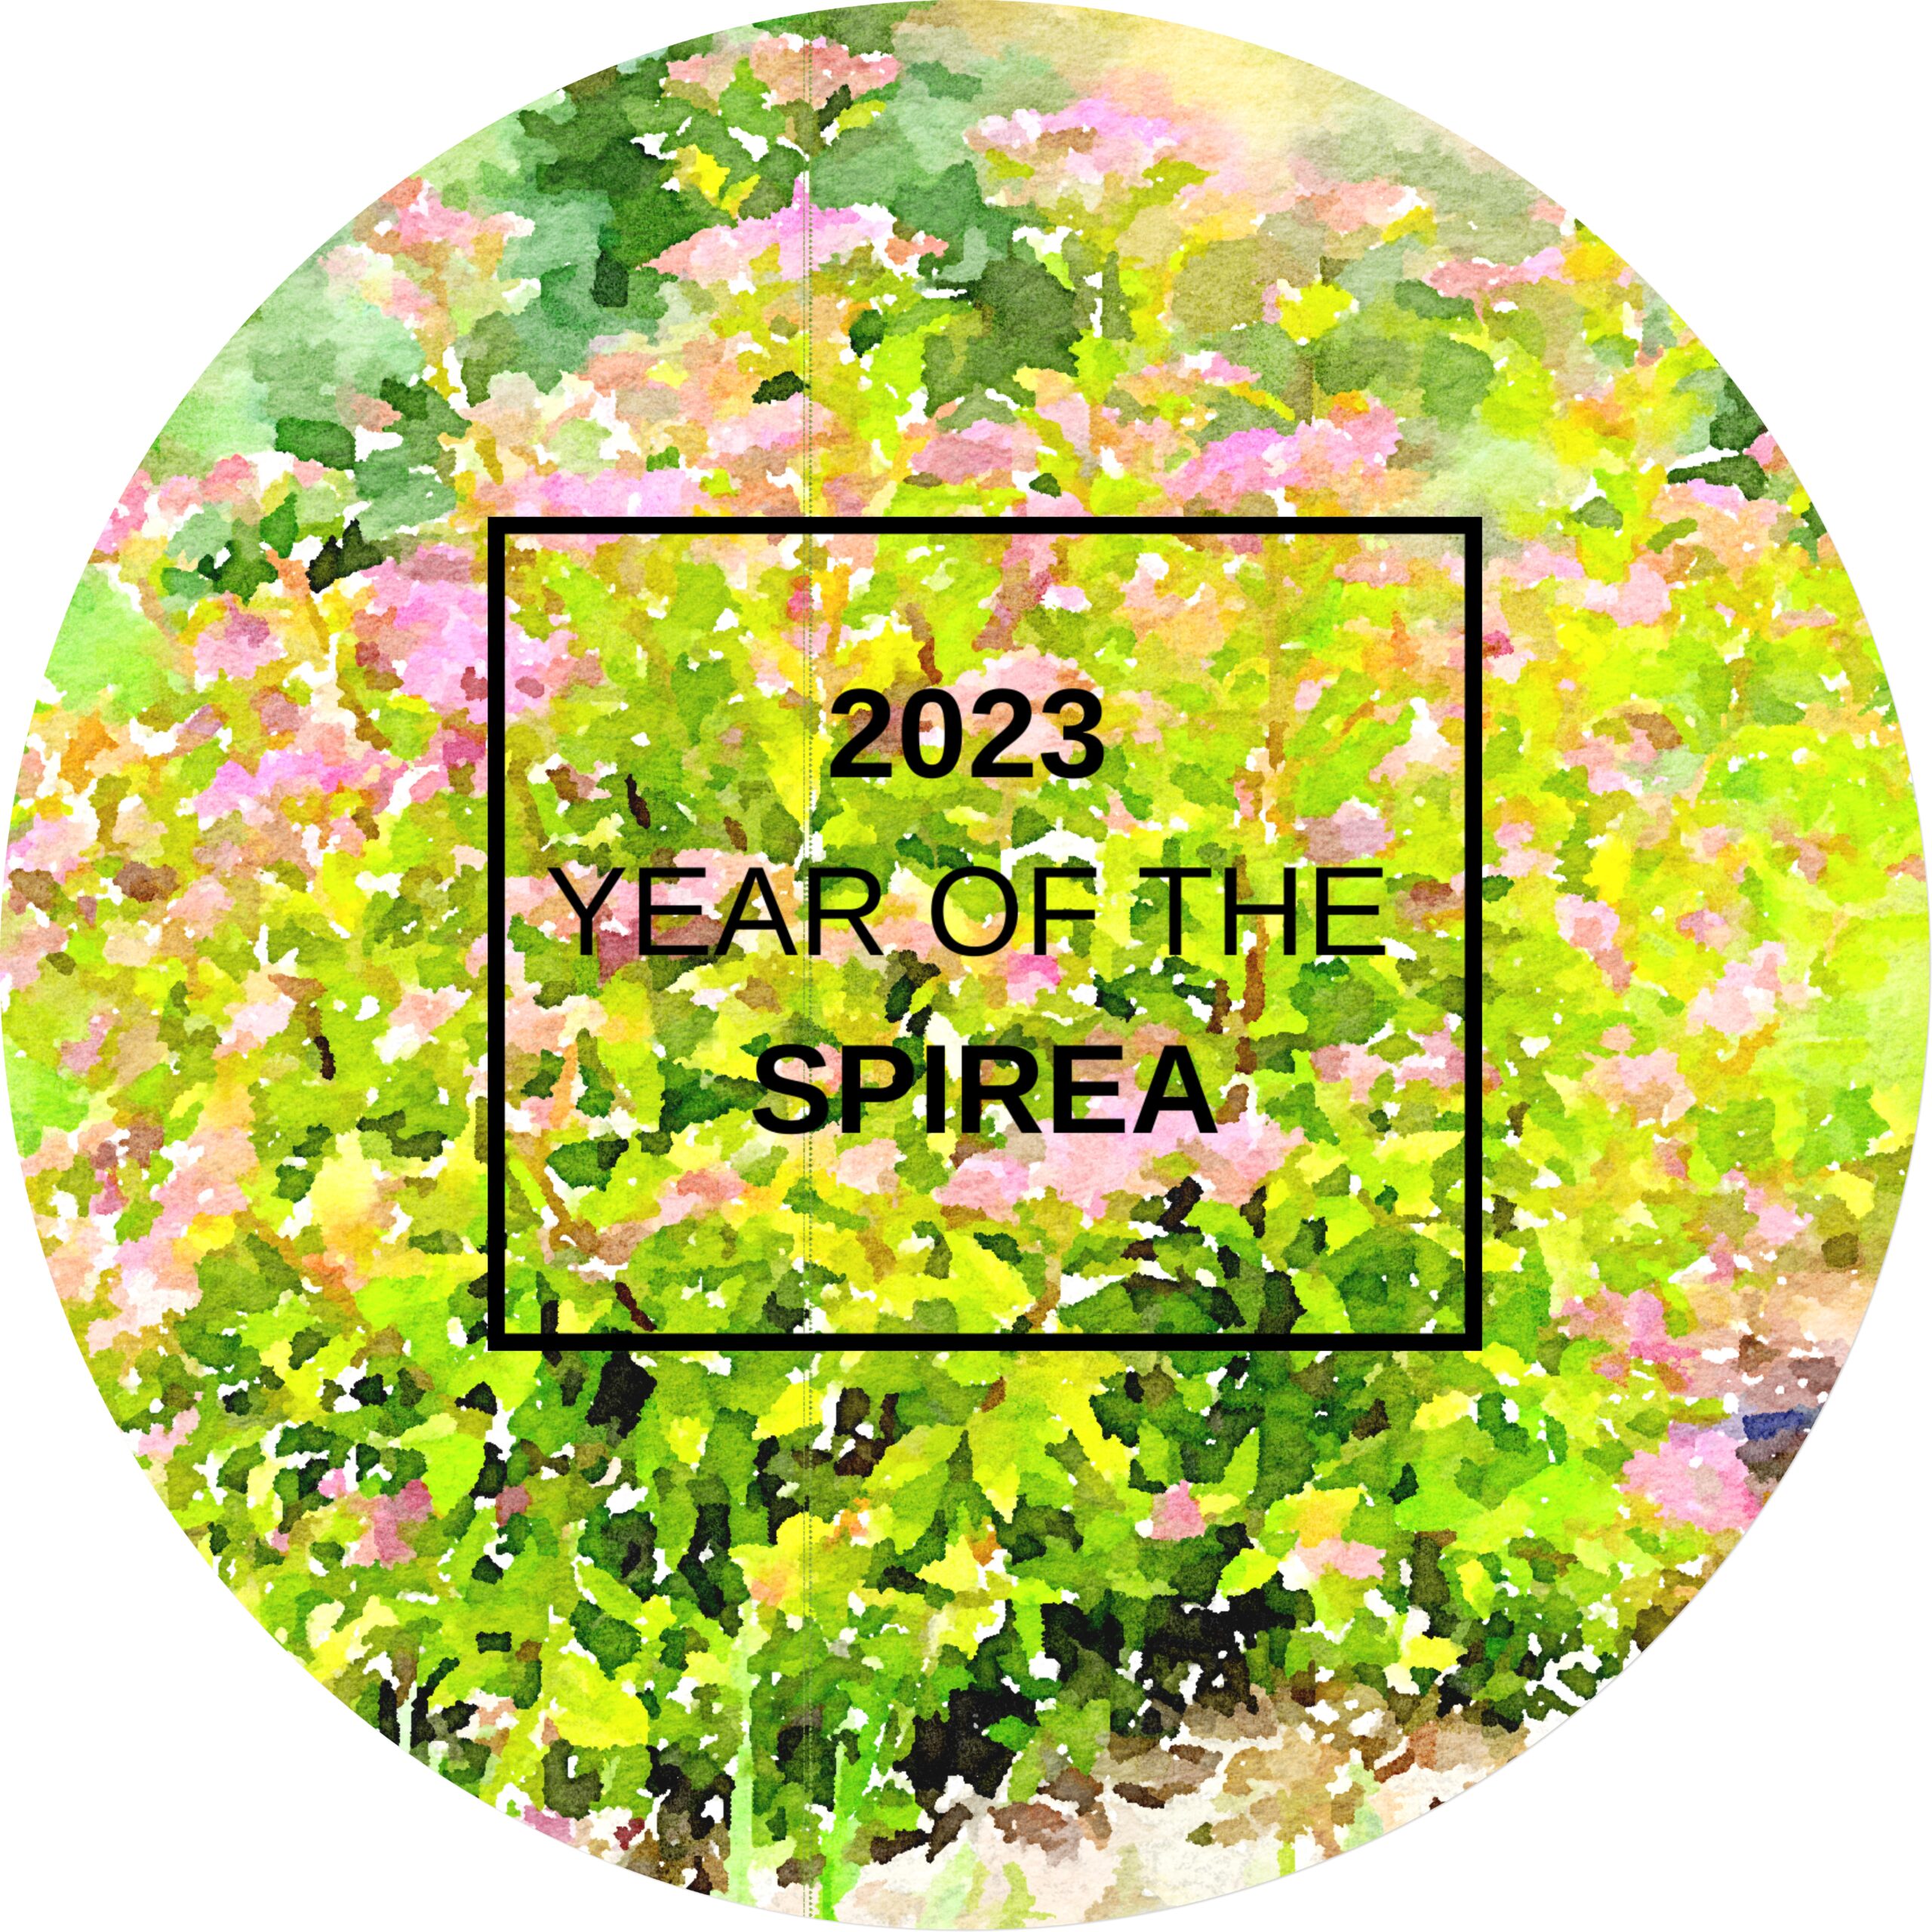 2023 Year of the Spirea (Circle via irfanview downsized)